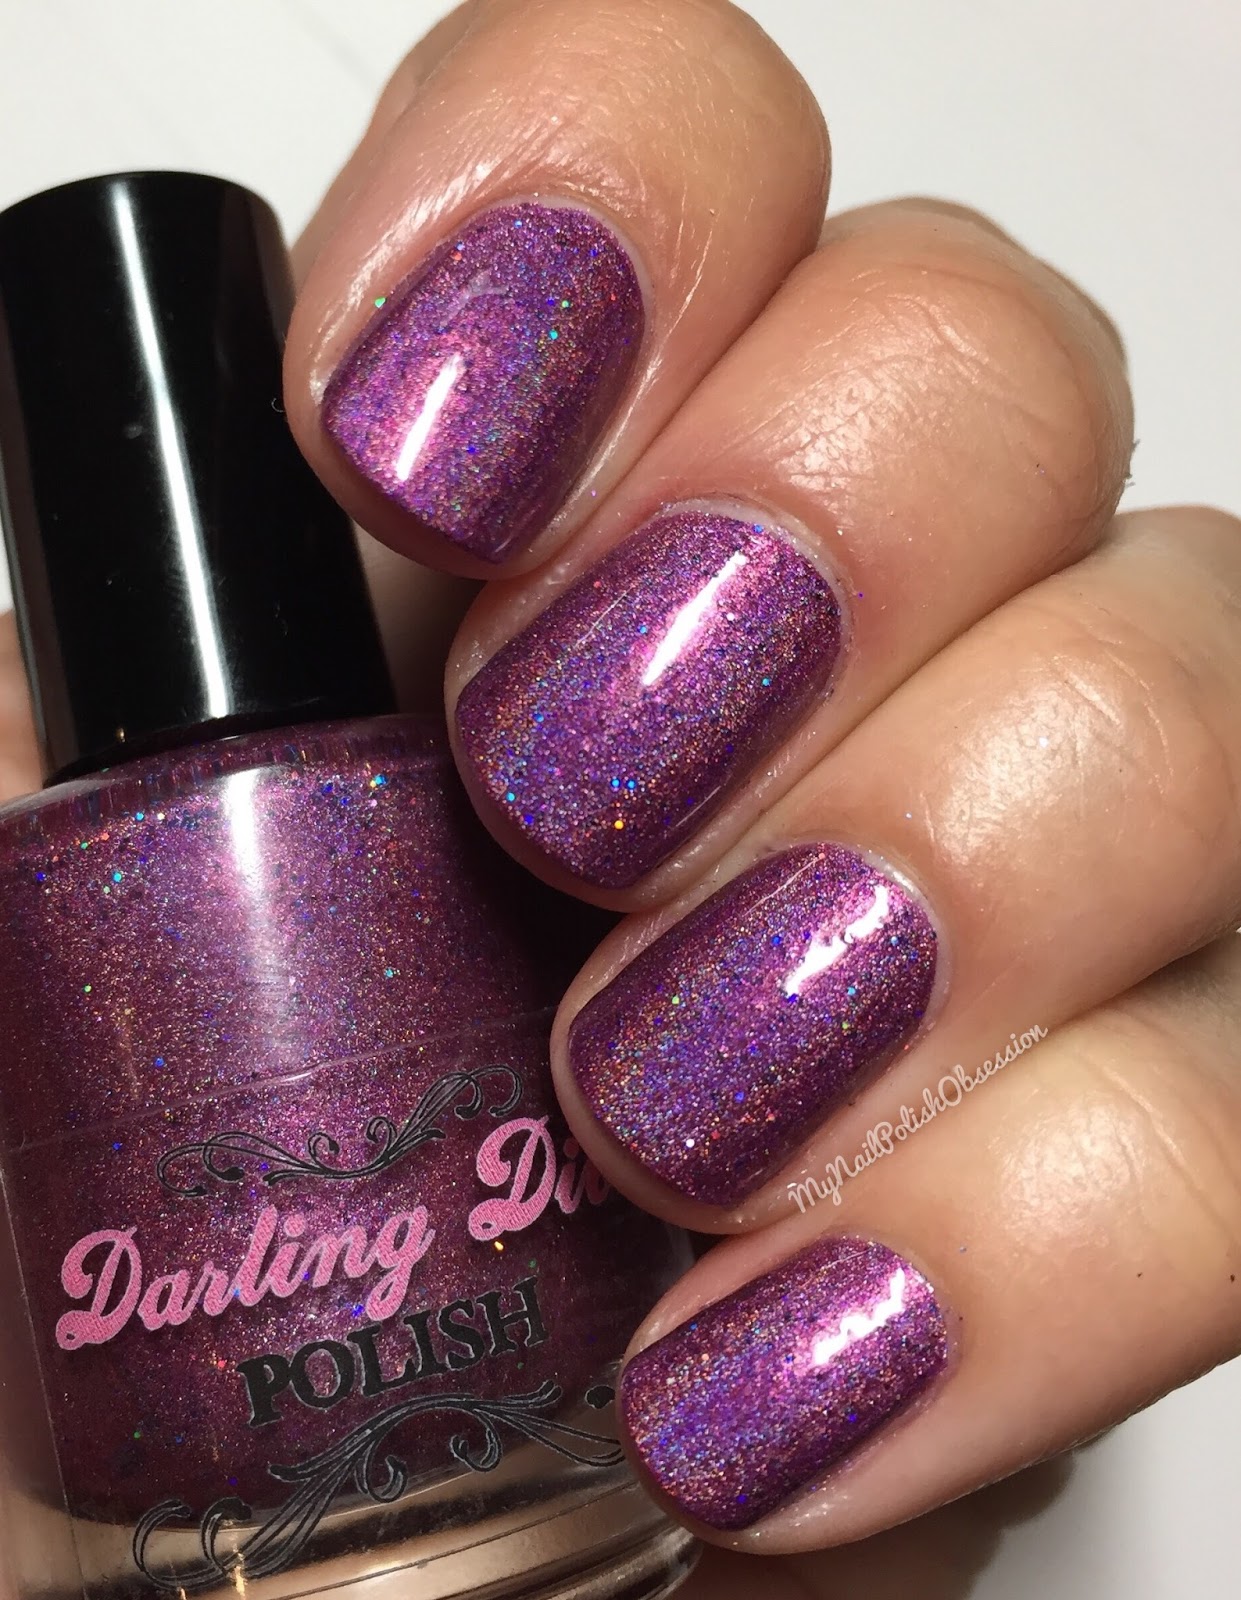 My Nail Polish Obsession: Darling Diva Polish The Force Collection